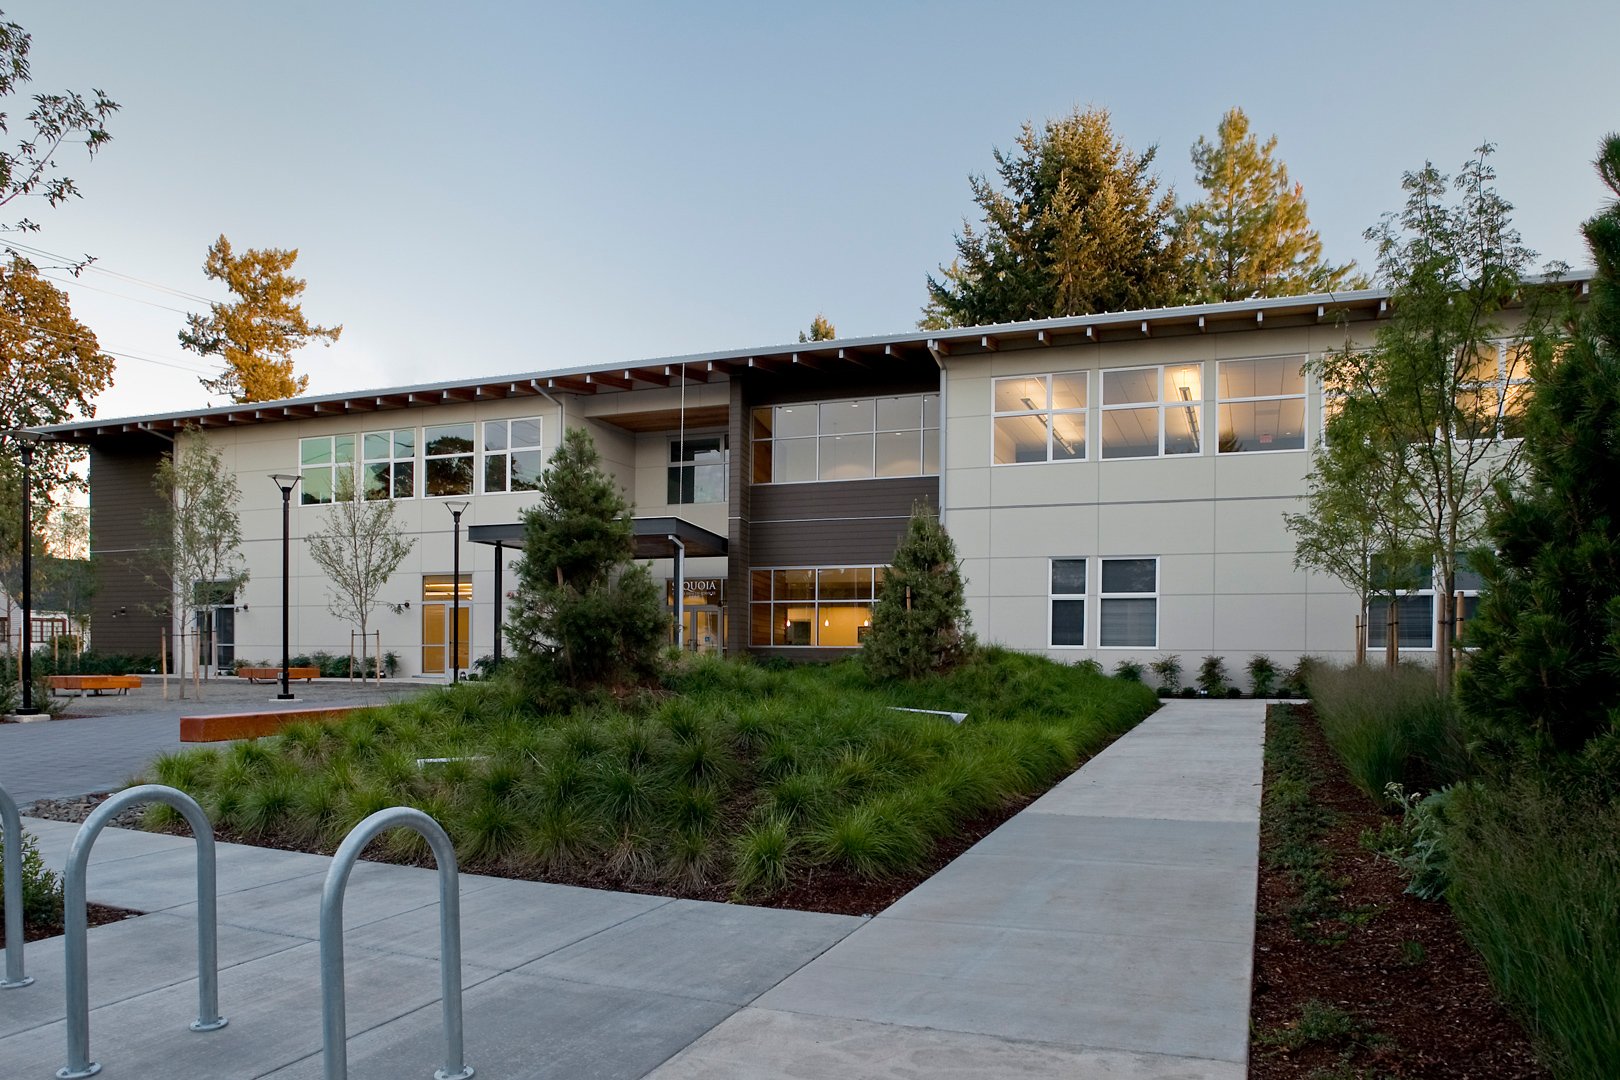 Sequoia Mental Health Services &amp; Spruce Place Apartments